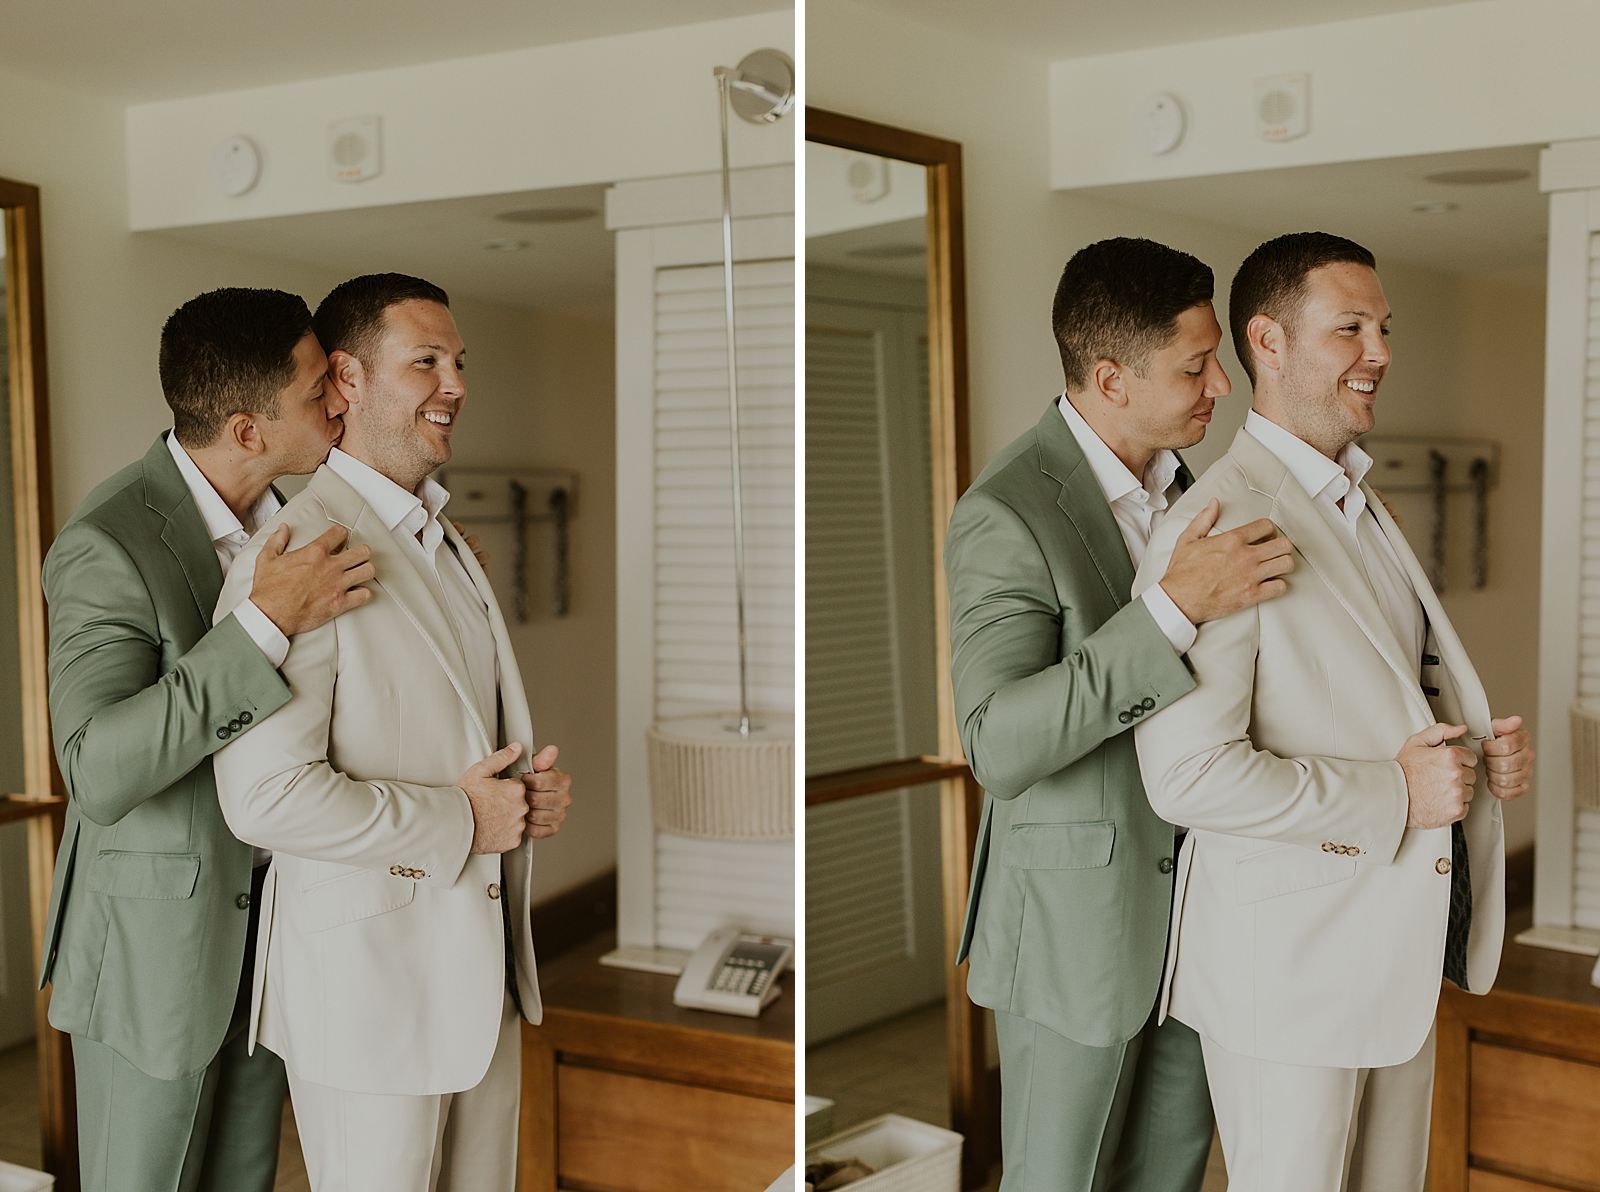 Groom just putting on white jacket in hotel room getting ready